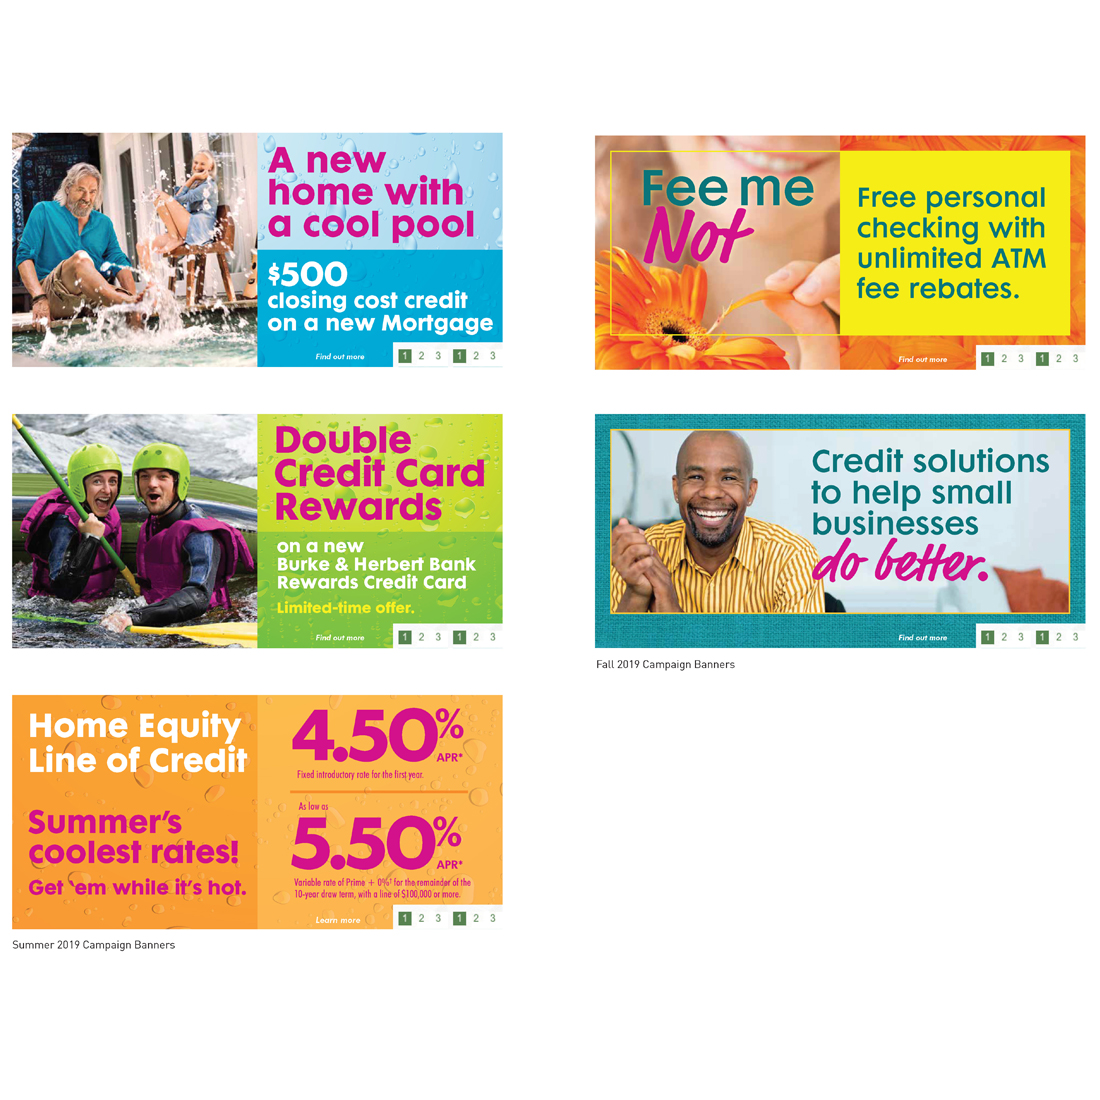 Burke and Herbert Bank Summer 2019 and Fall 2019 promotional banner ads